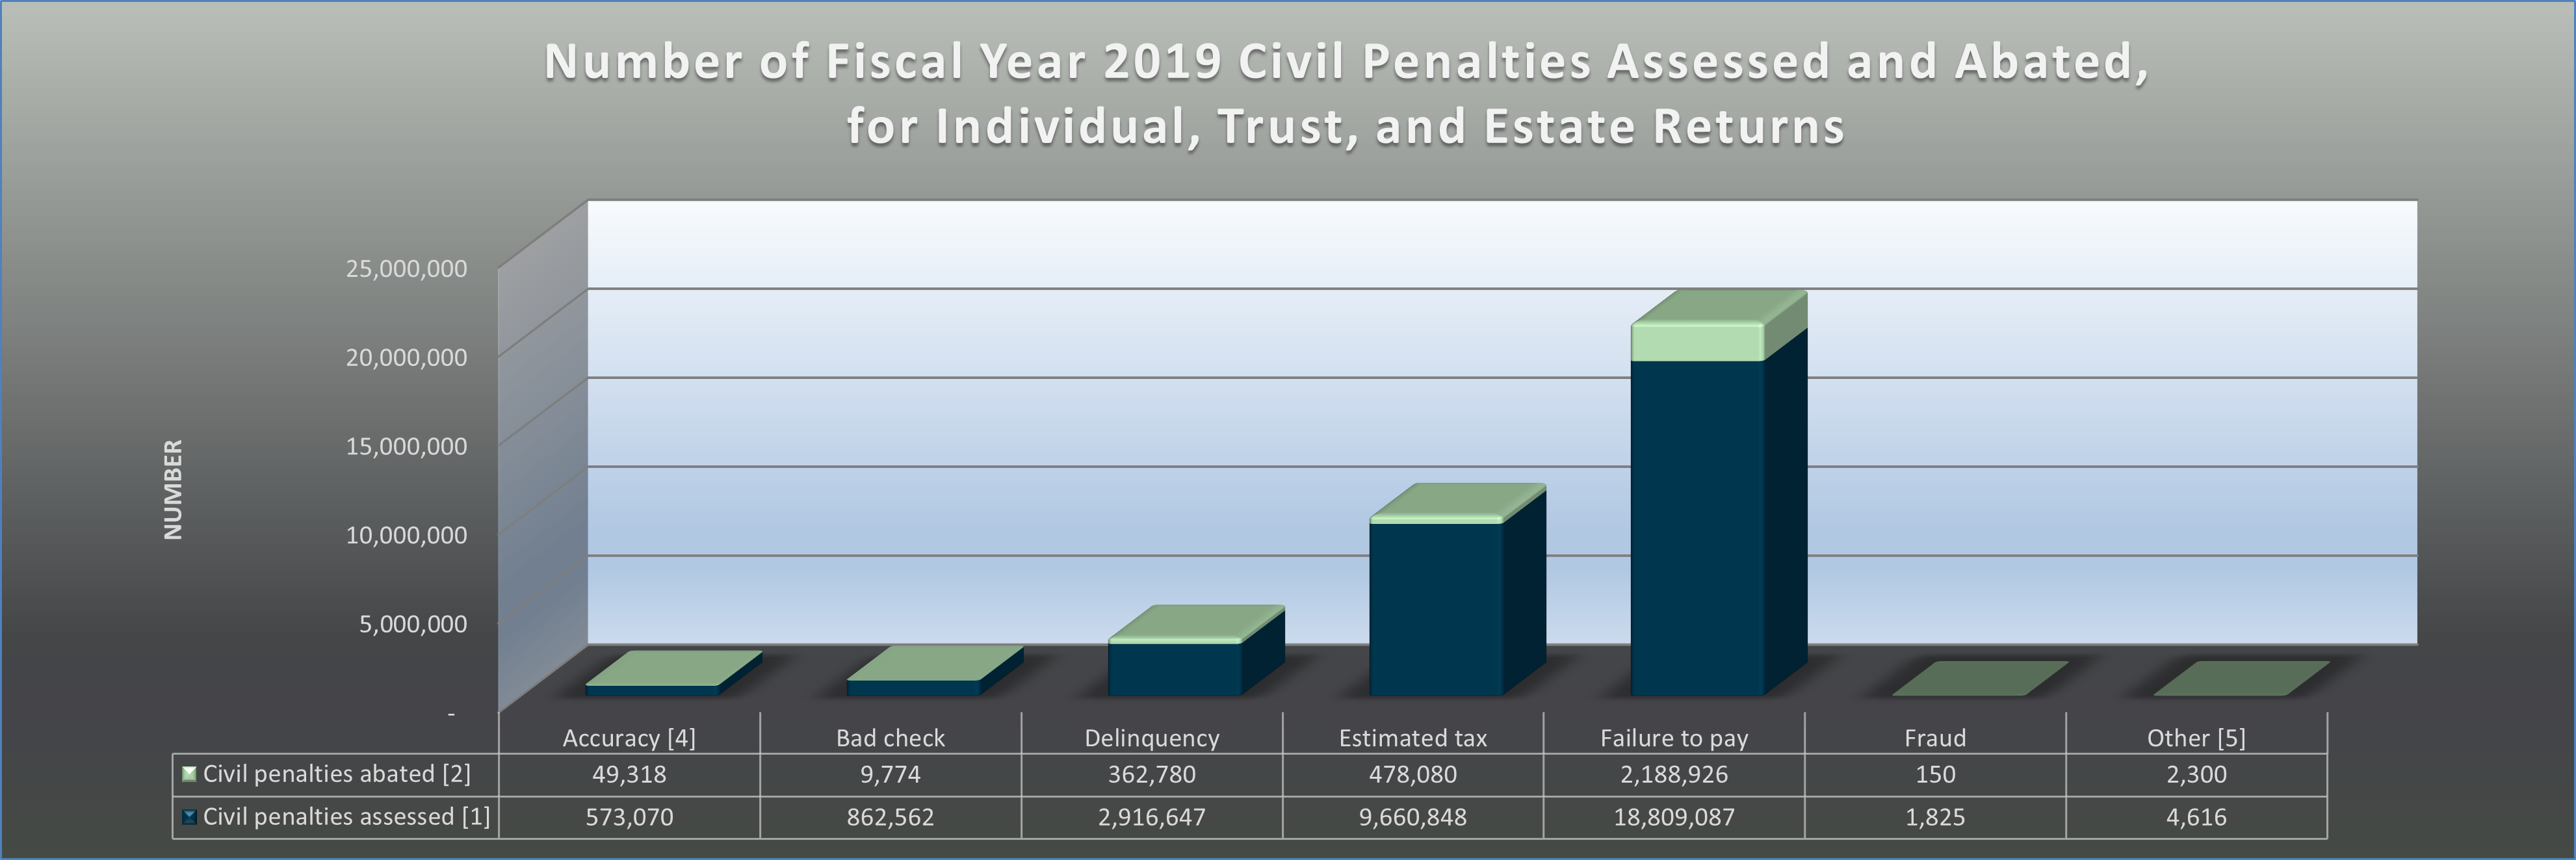 Number of Fiscal Year 2019 Civil Penalties Assessed and Abated